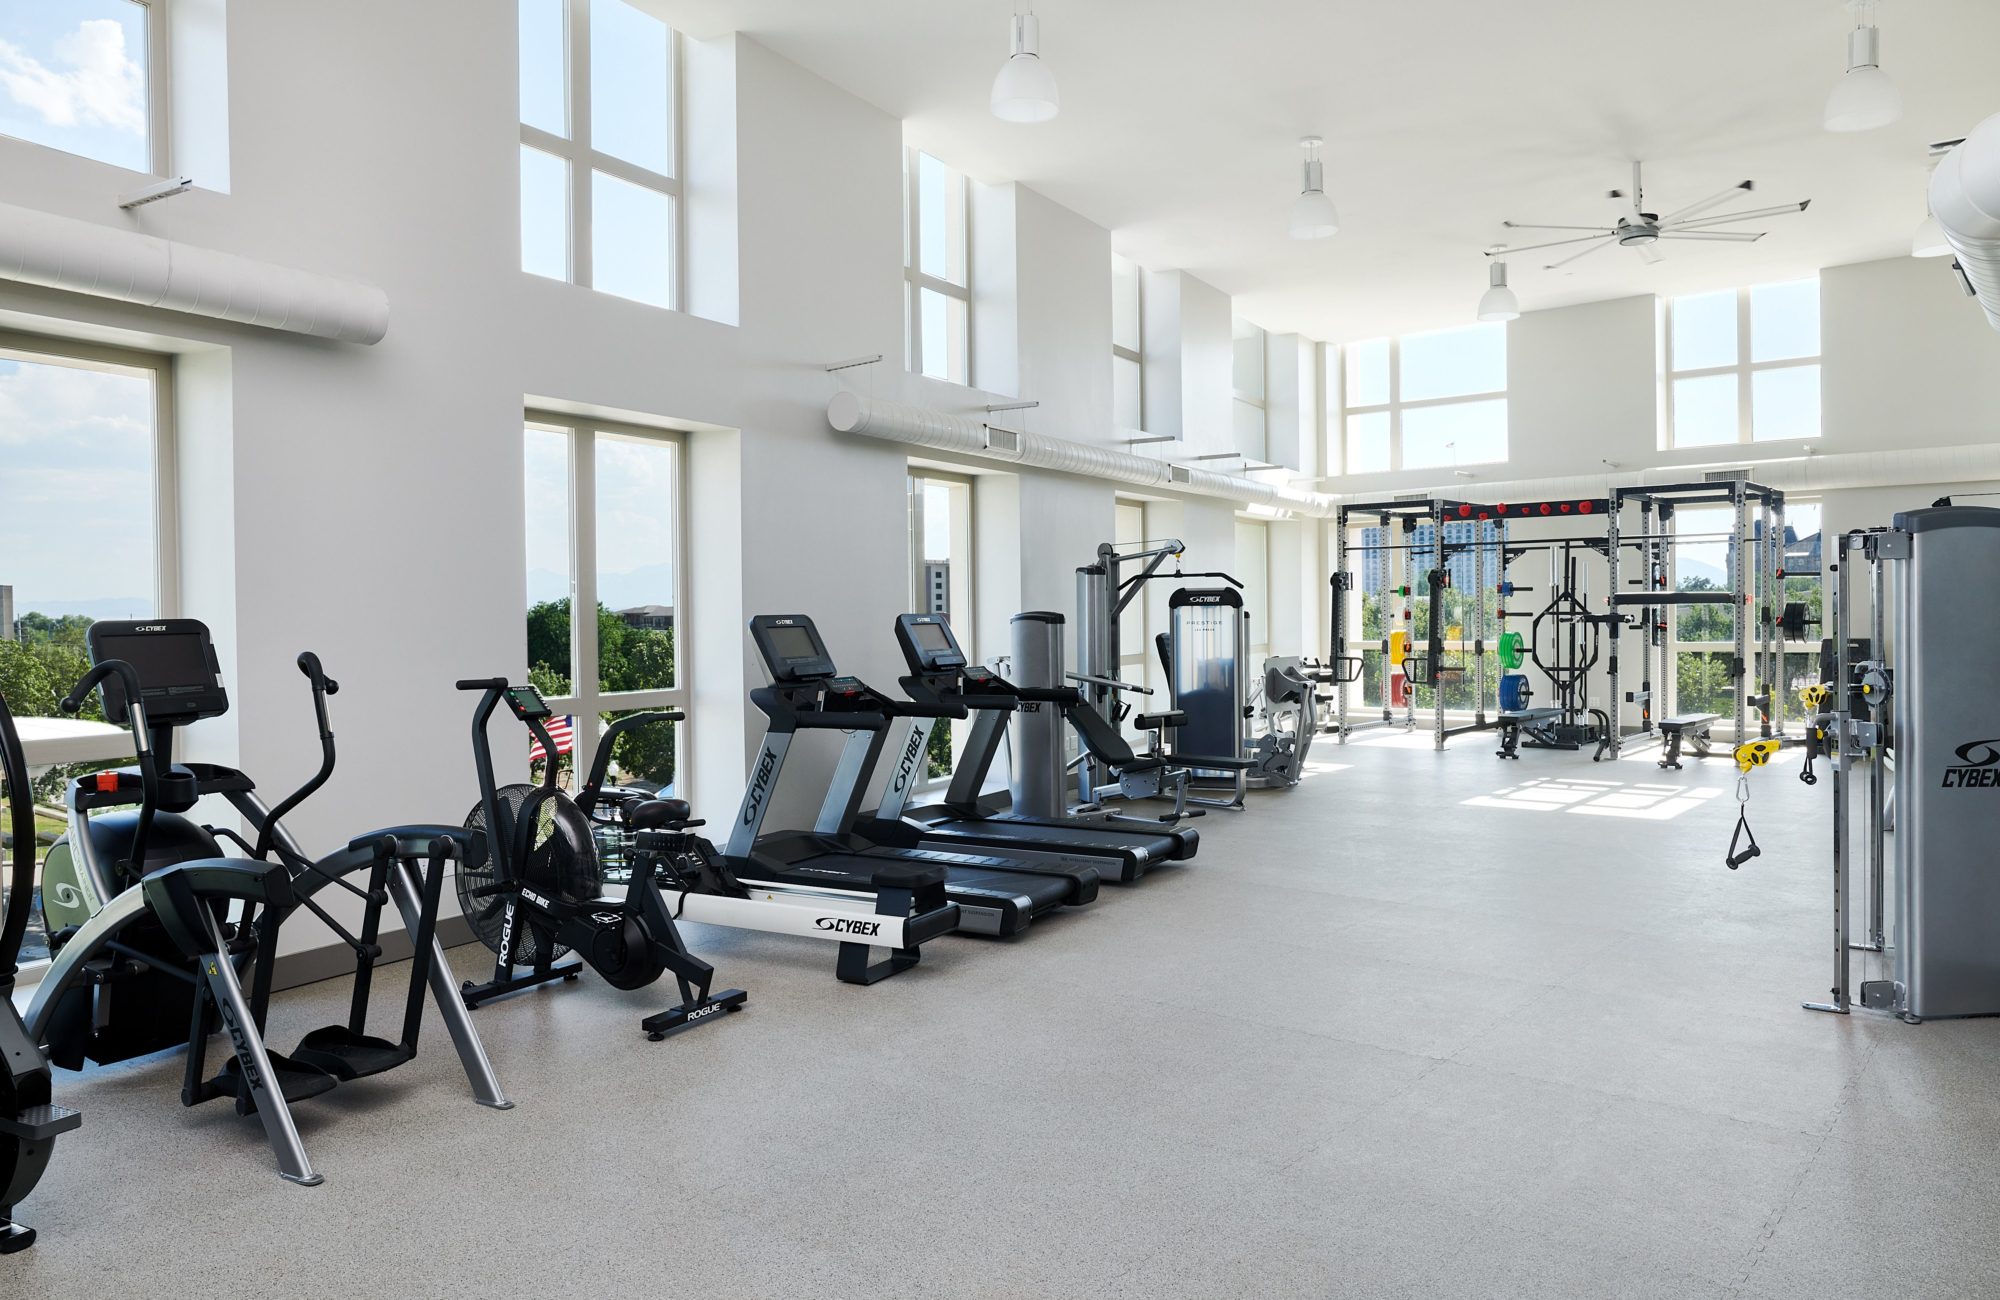 Spacious fitness center with bright lighting and fully stocked weights and cardio machines